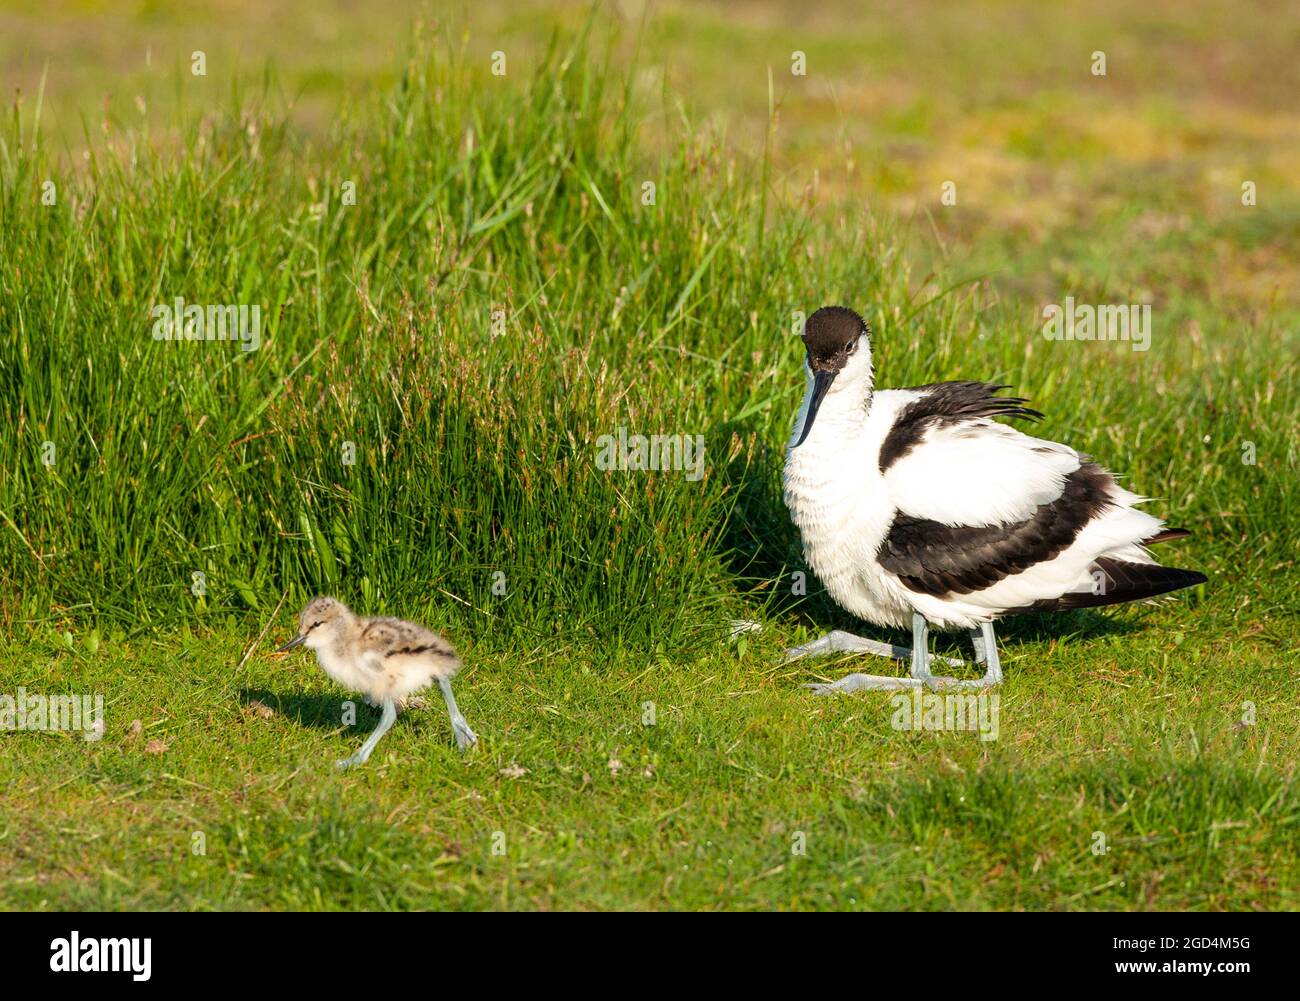 Pied Avocet (Recurvirostra avosetta) adult perched on gras with chick walking away Stock Photo